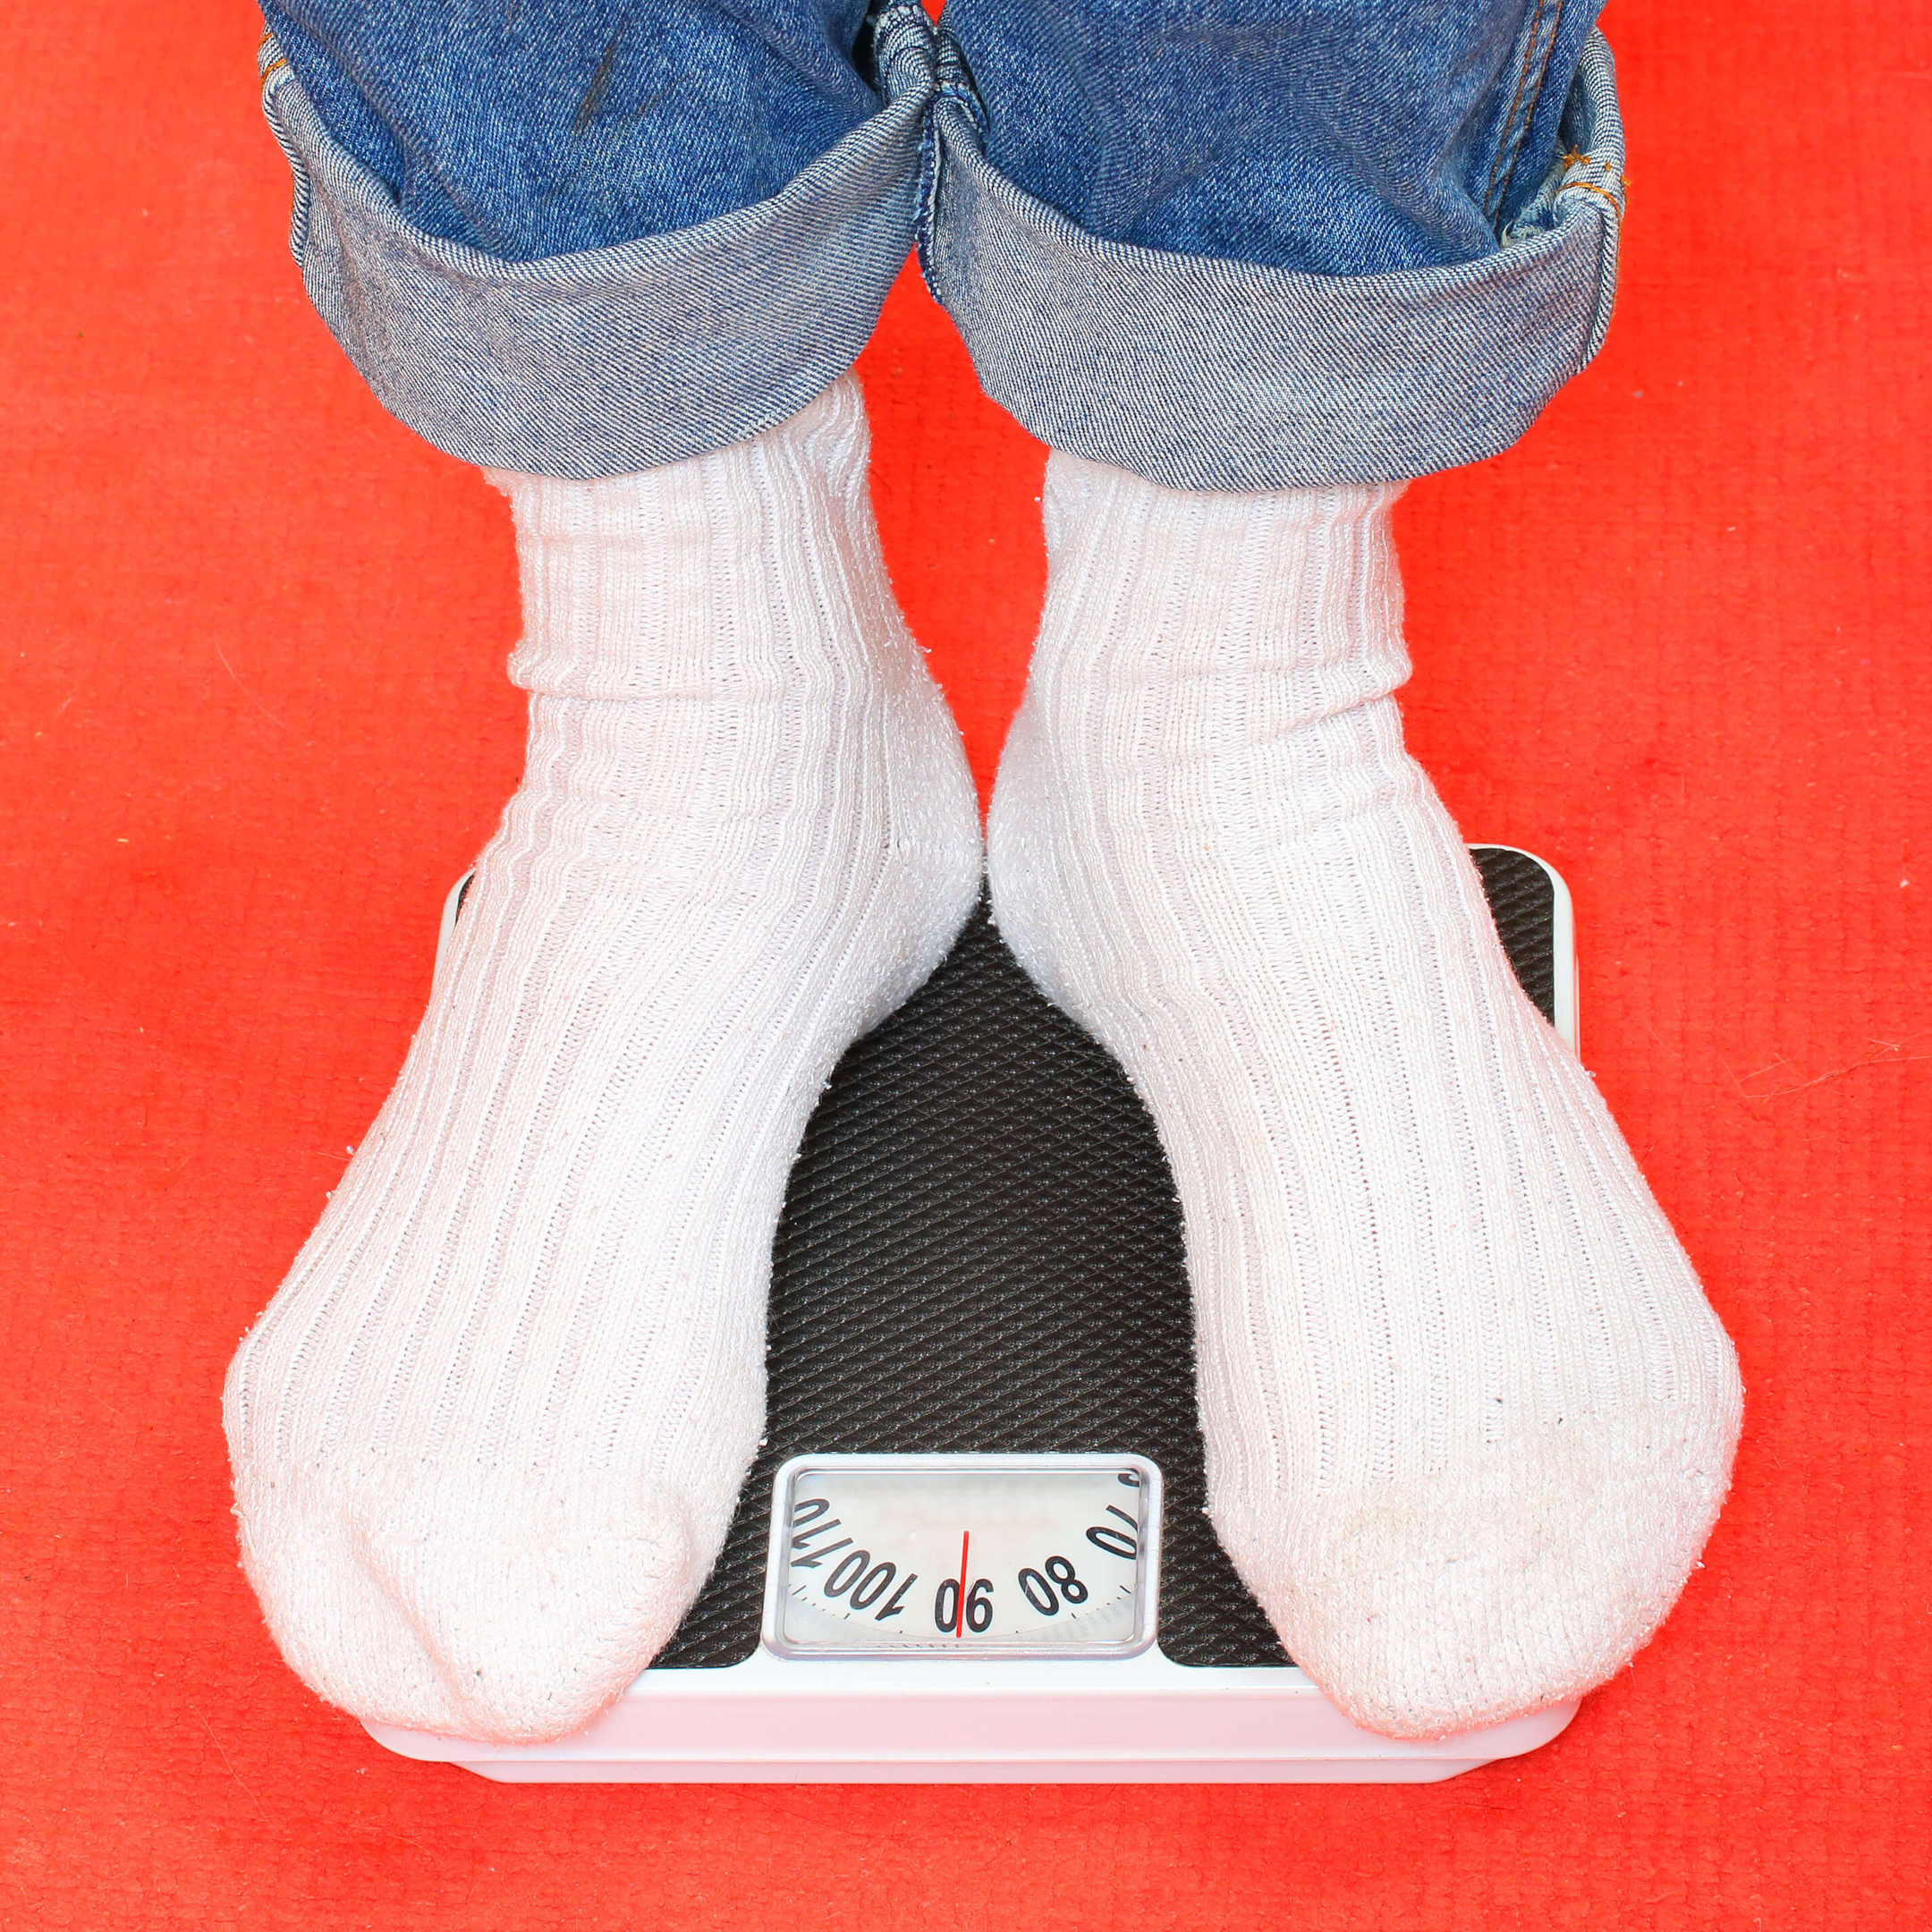 Weight scale, white socks